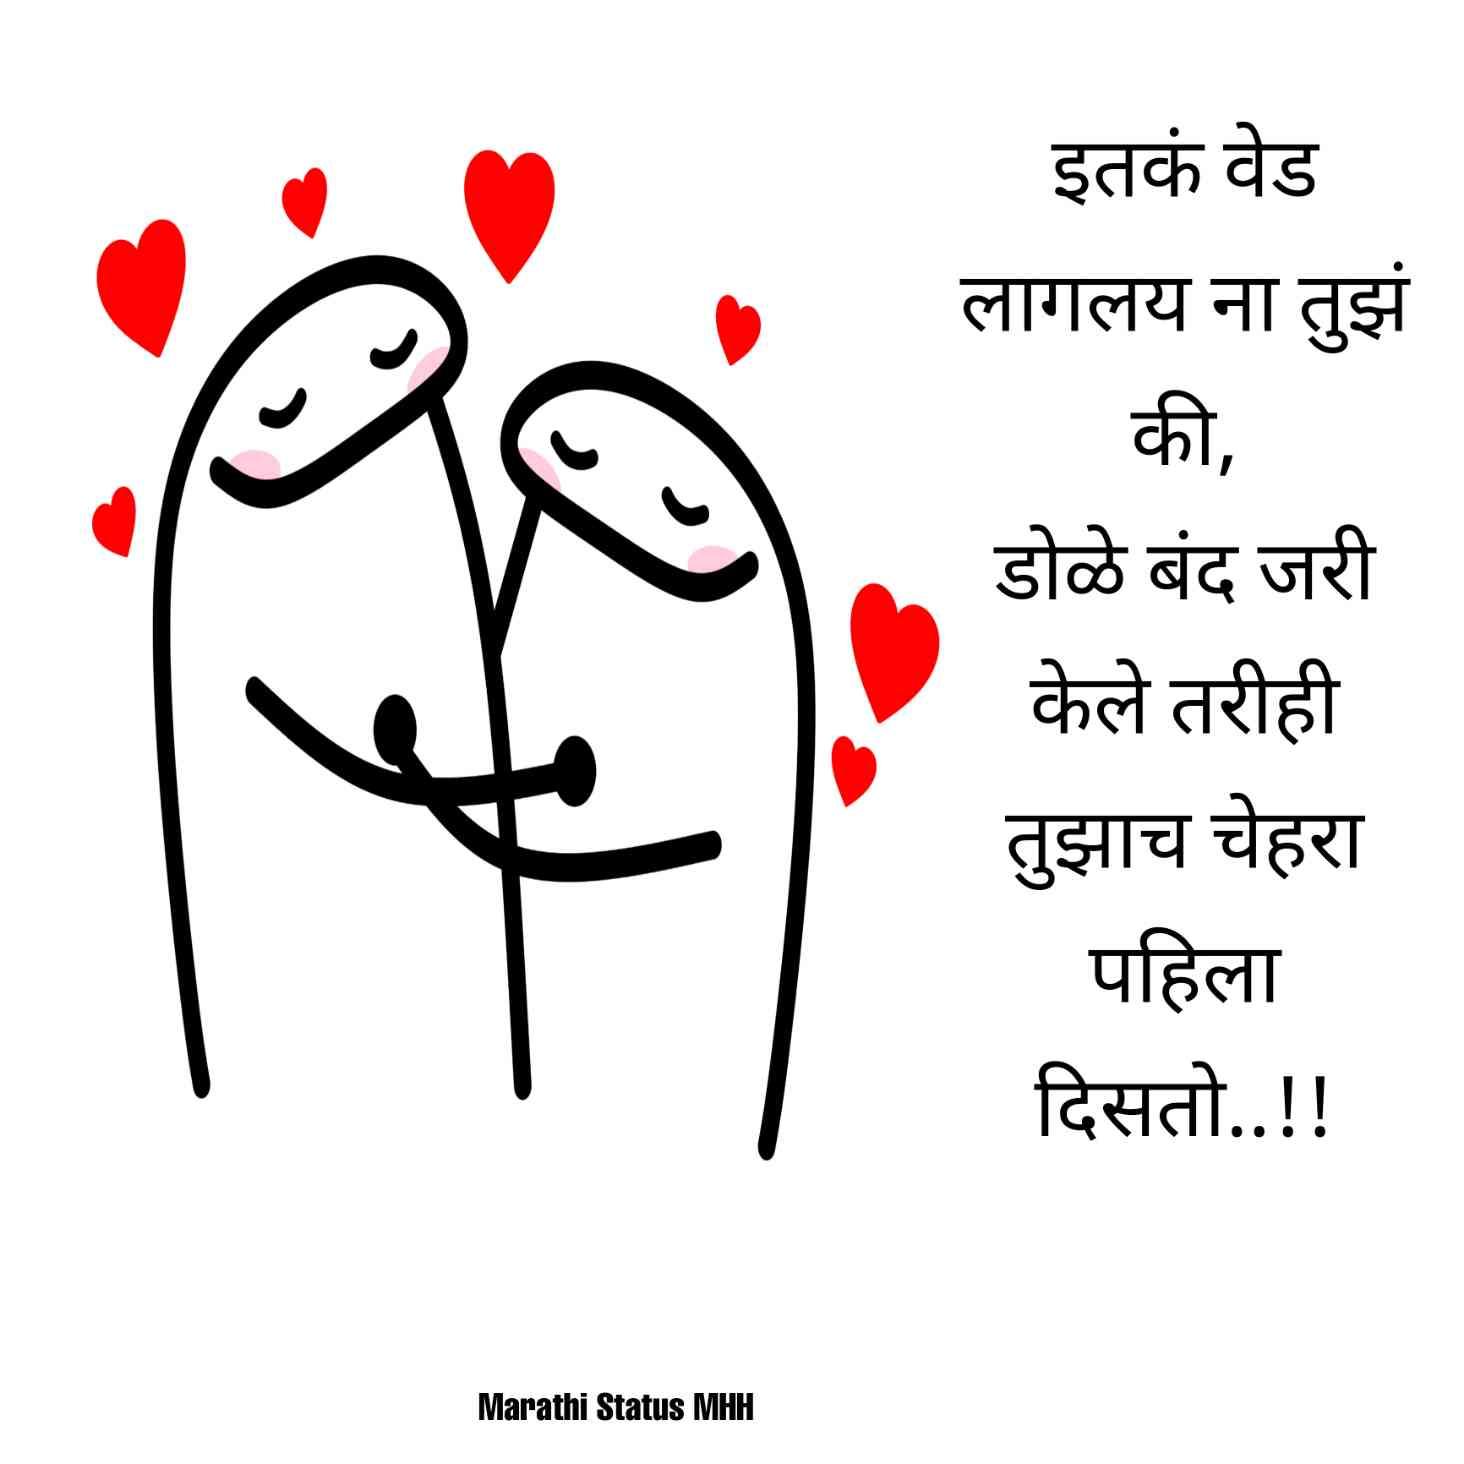 Heart touching love quotes marathi